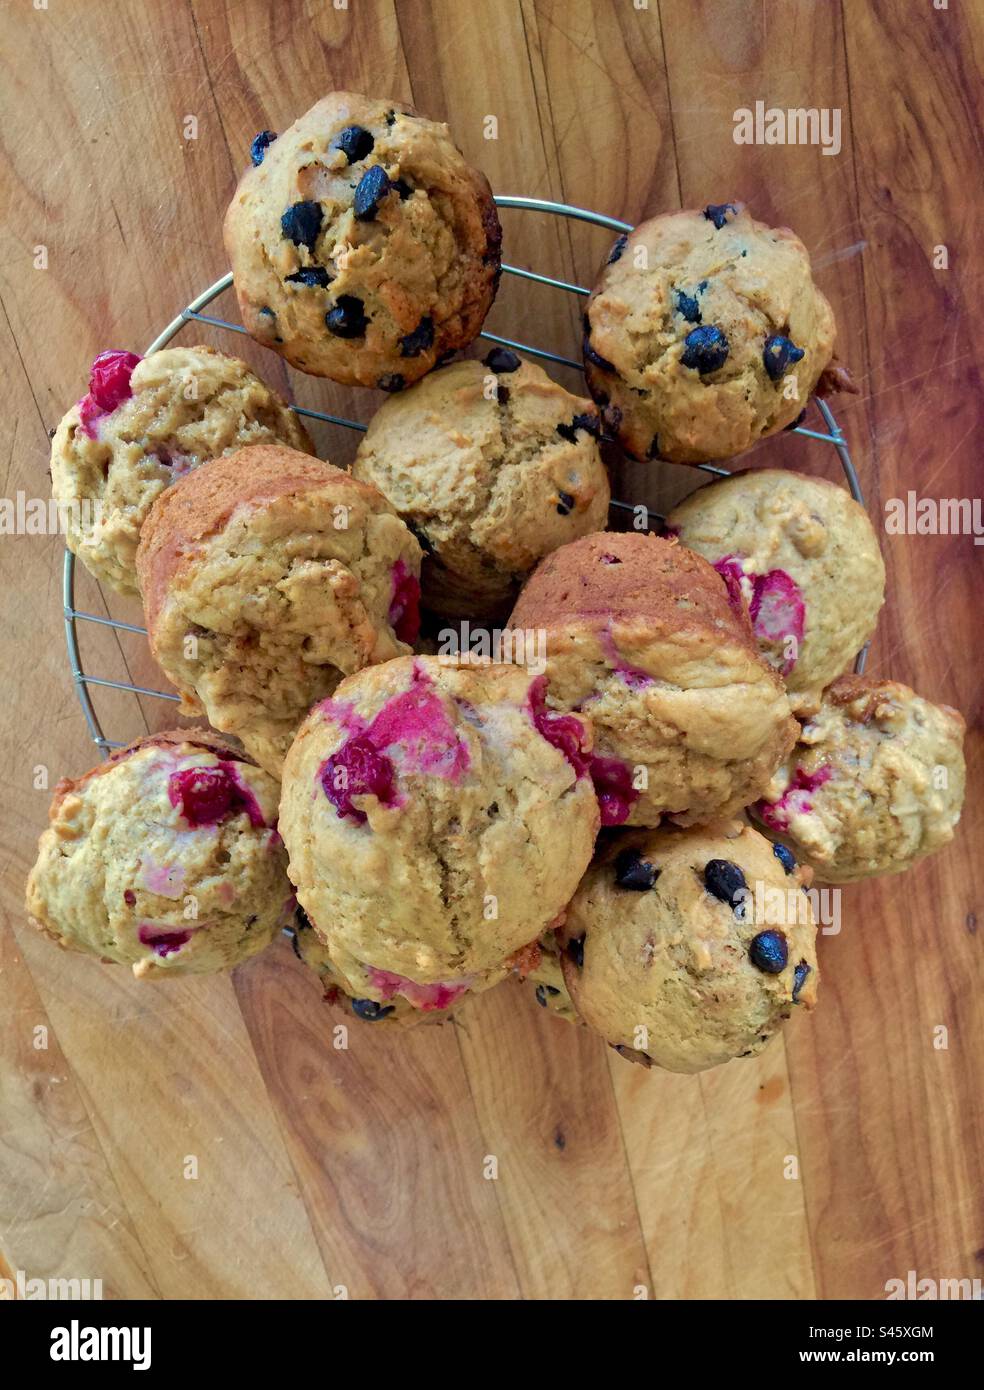 Very fresh muffins on a cooling wire rack. Cutting board. Wood grain. Natural. Stock Photo